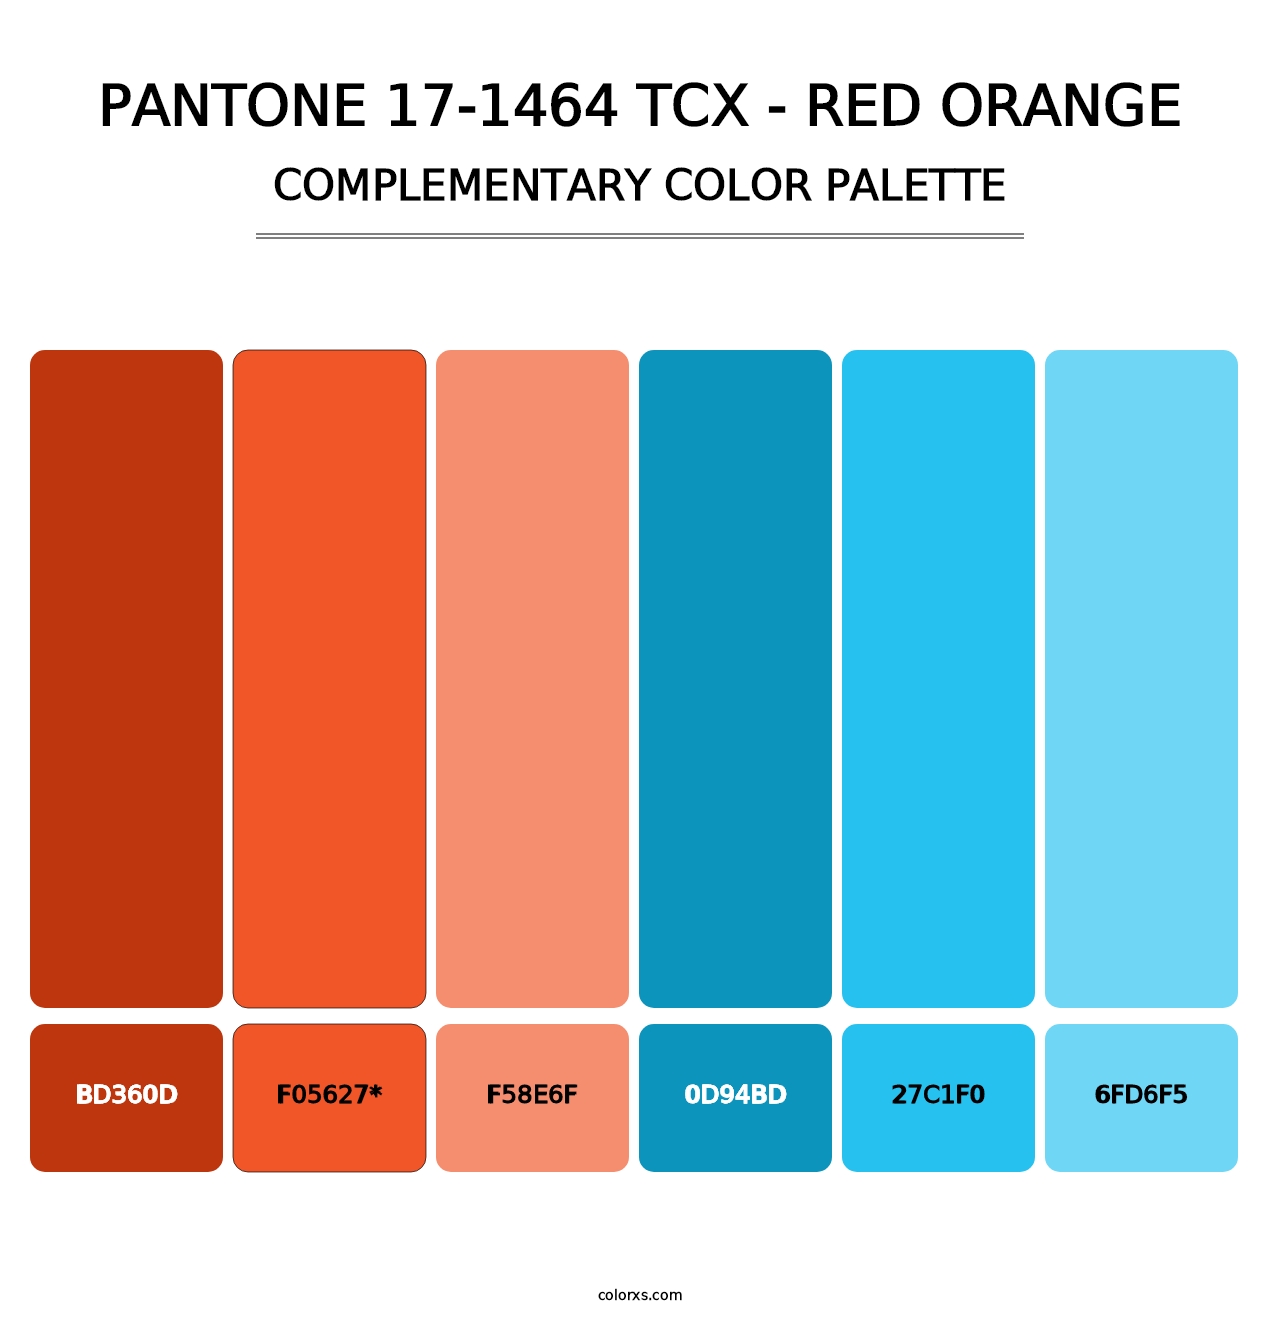 PANTONE 17-1464 TCX - Red Orange - Complementary Color Palette